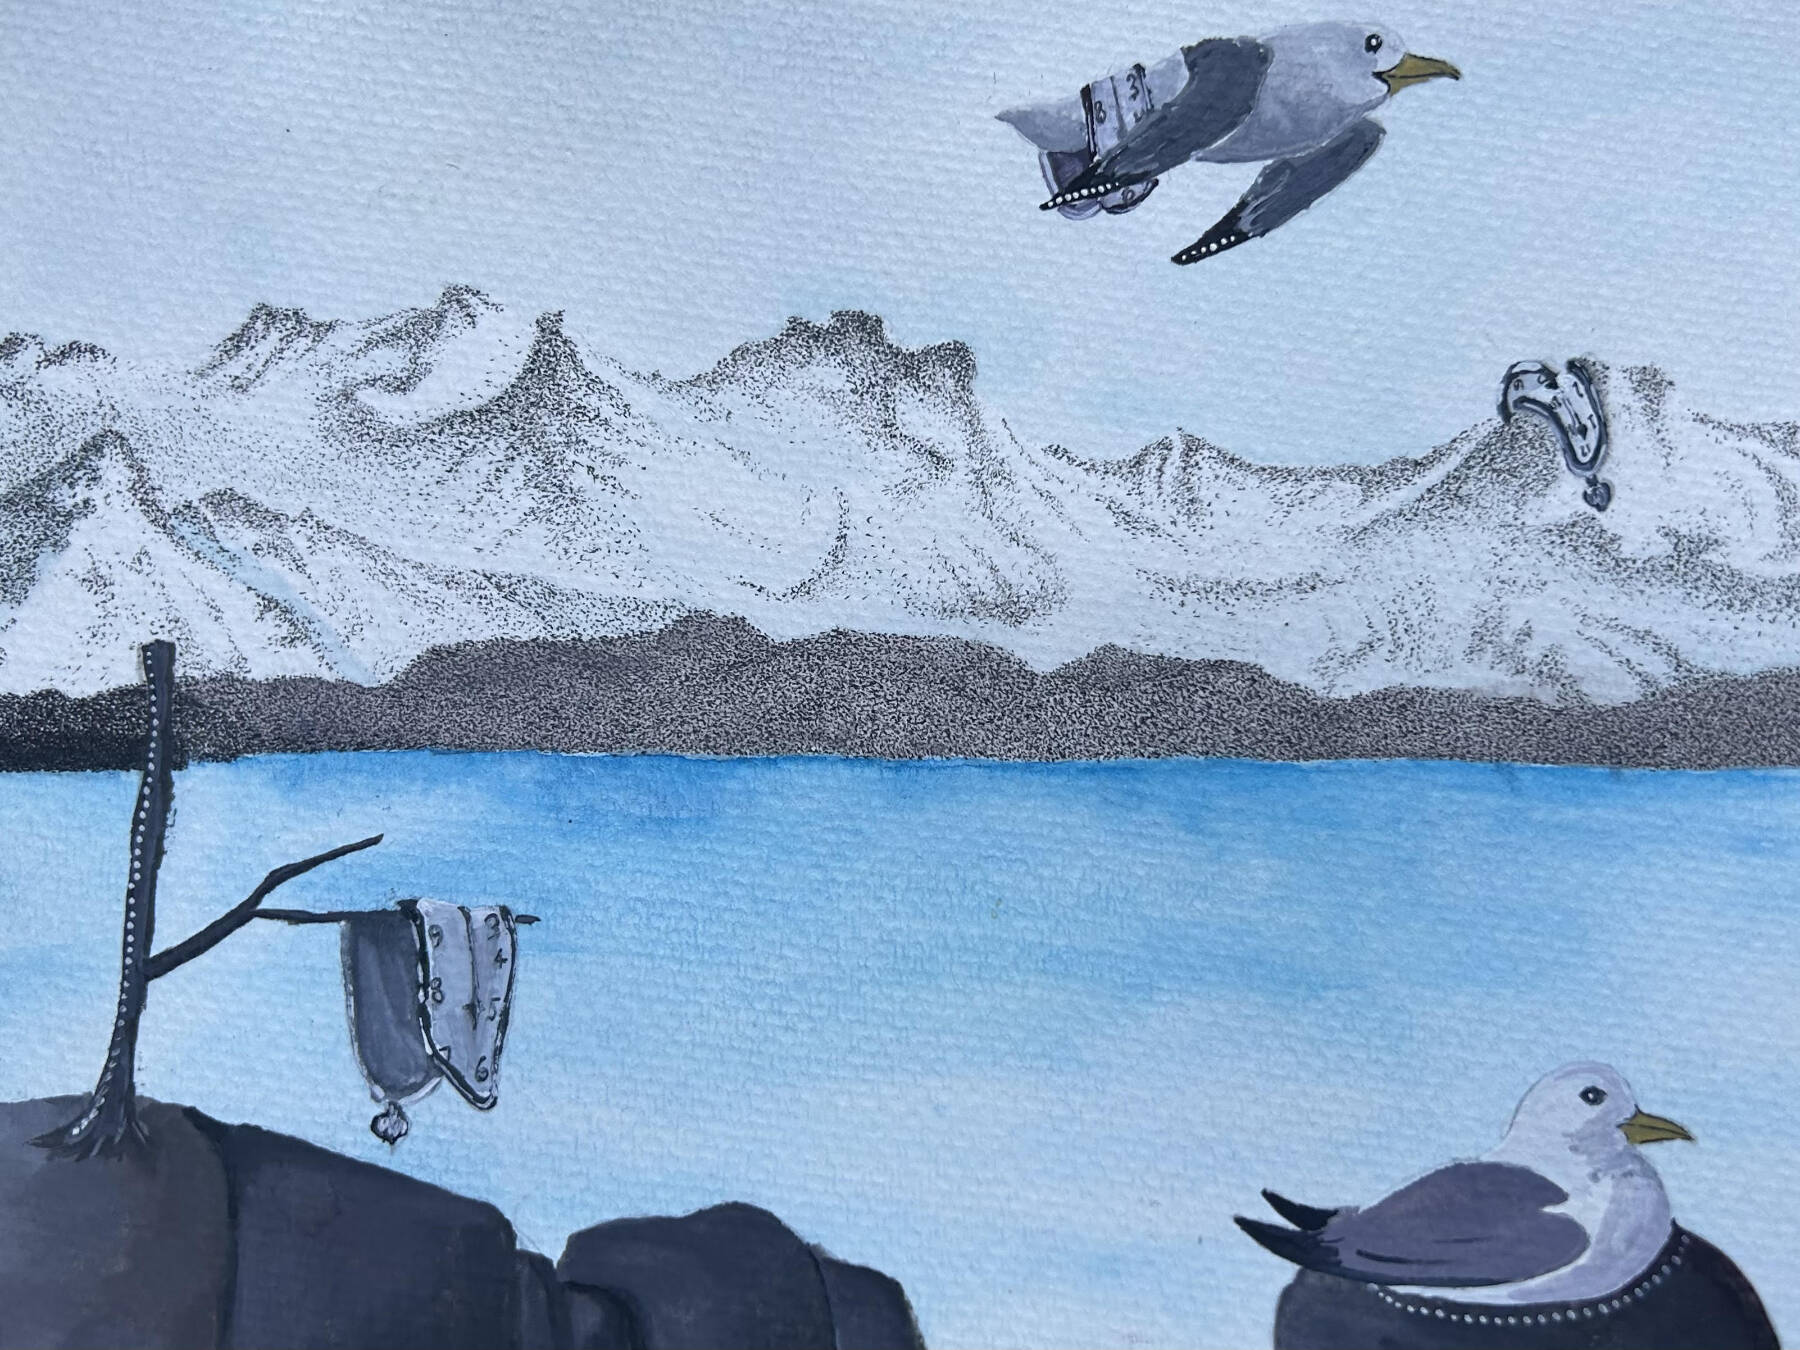 “Clocks, Kittiwakes, and the Persistence of Homer,” a gouache and ink piece created by Renee Veldman, is on display in Homer Council on the Arts’ “Fun with 5x7” exhibit through December. Photo provided by Renee Veldman